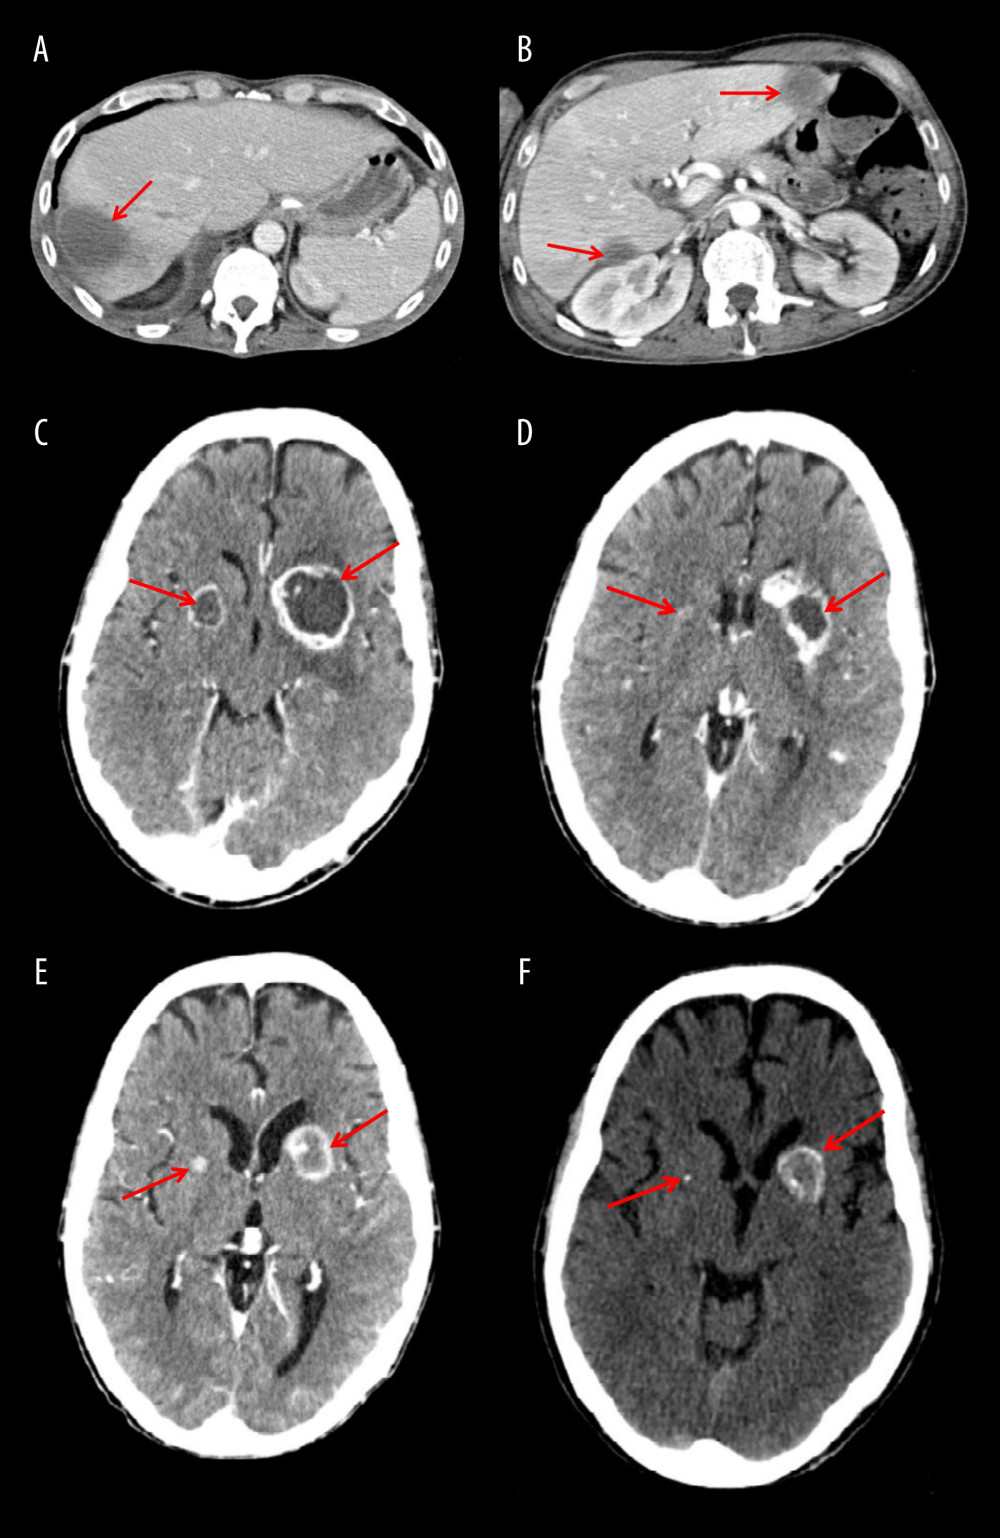 Abdominal and cerebral CT scan performed after treatment. (A, B) Residual lesions of liver abscesses after metronidazole therapy. (C) Amebic brain abscesses after 2 weeks of i.v. metronidazole treatment. (D) Amebic brain abscesses after 4 weeks of i.v. metronidazole treatment. (E) Amebic brain abscesses at end of treatment, 10 weeks of i.v. metronidazole treatment. (F) Residual lesions of amebic brain abscesses 6 months after discharge from the surgical ICU.